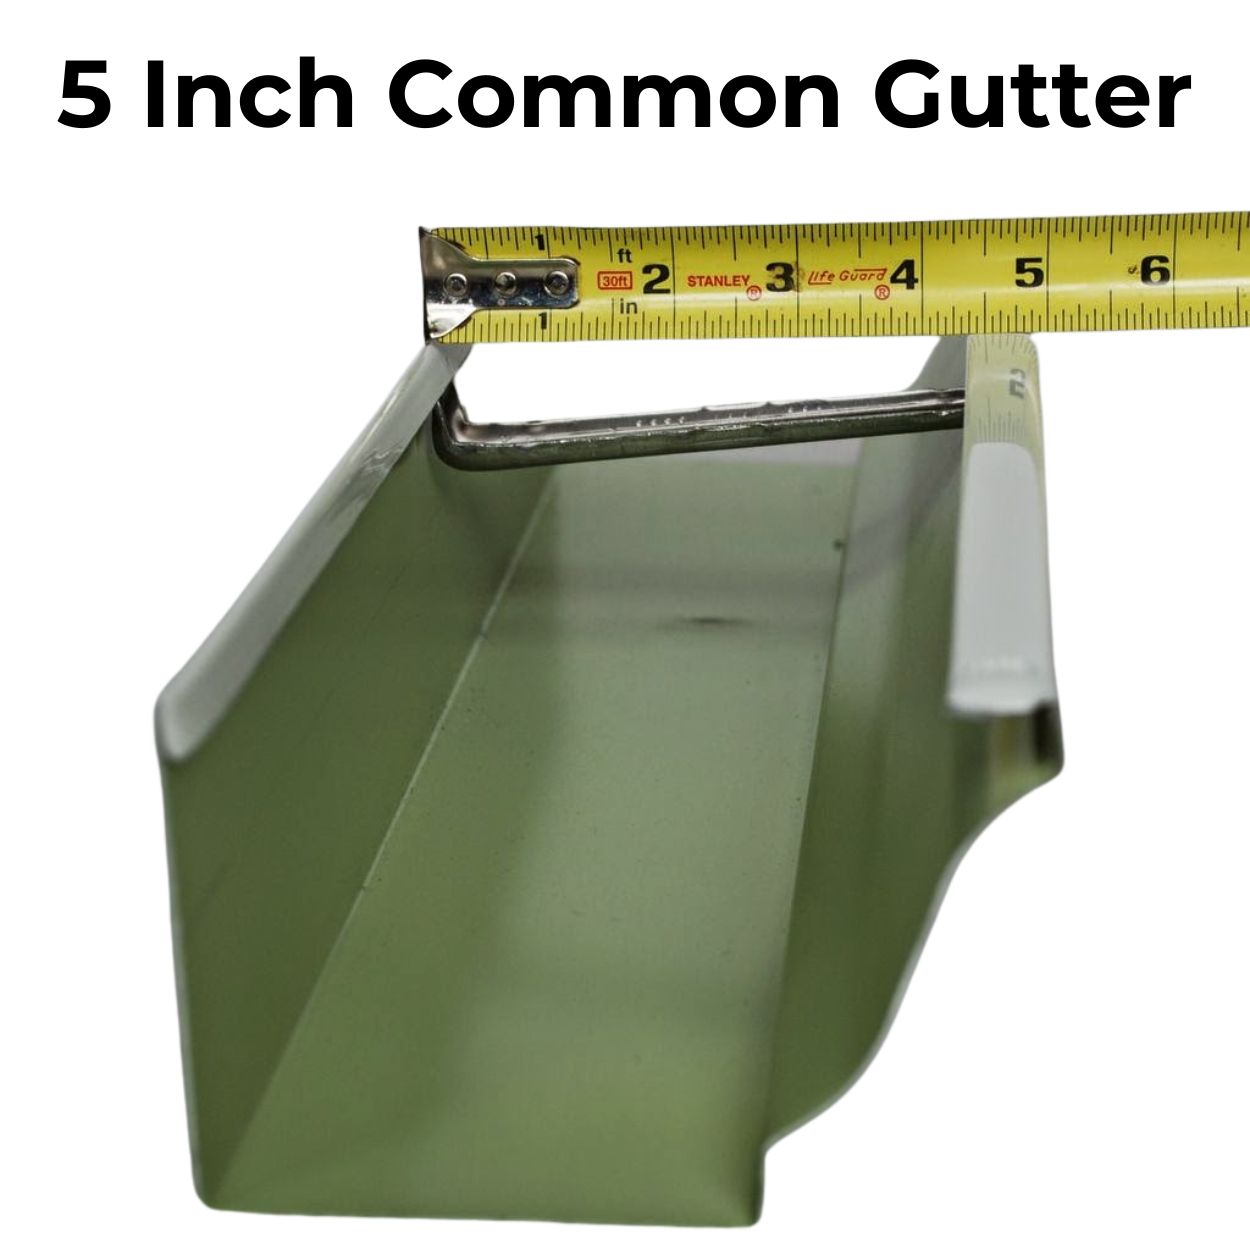 Most Common Residential Gutter 5 Inch Standard K-Style